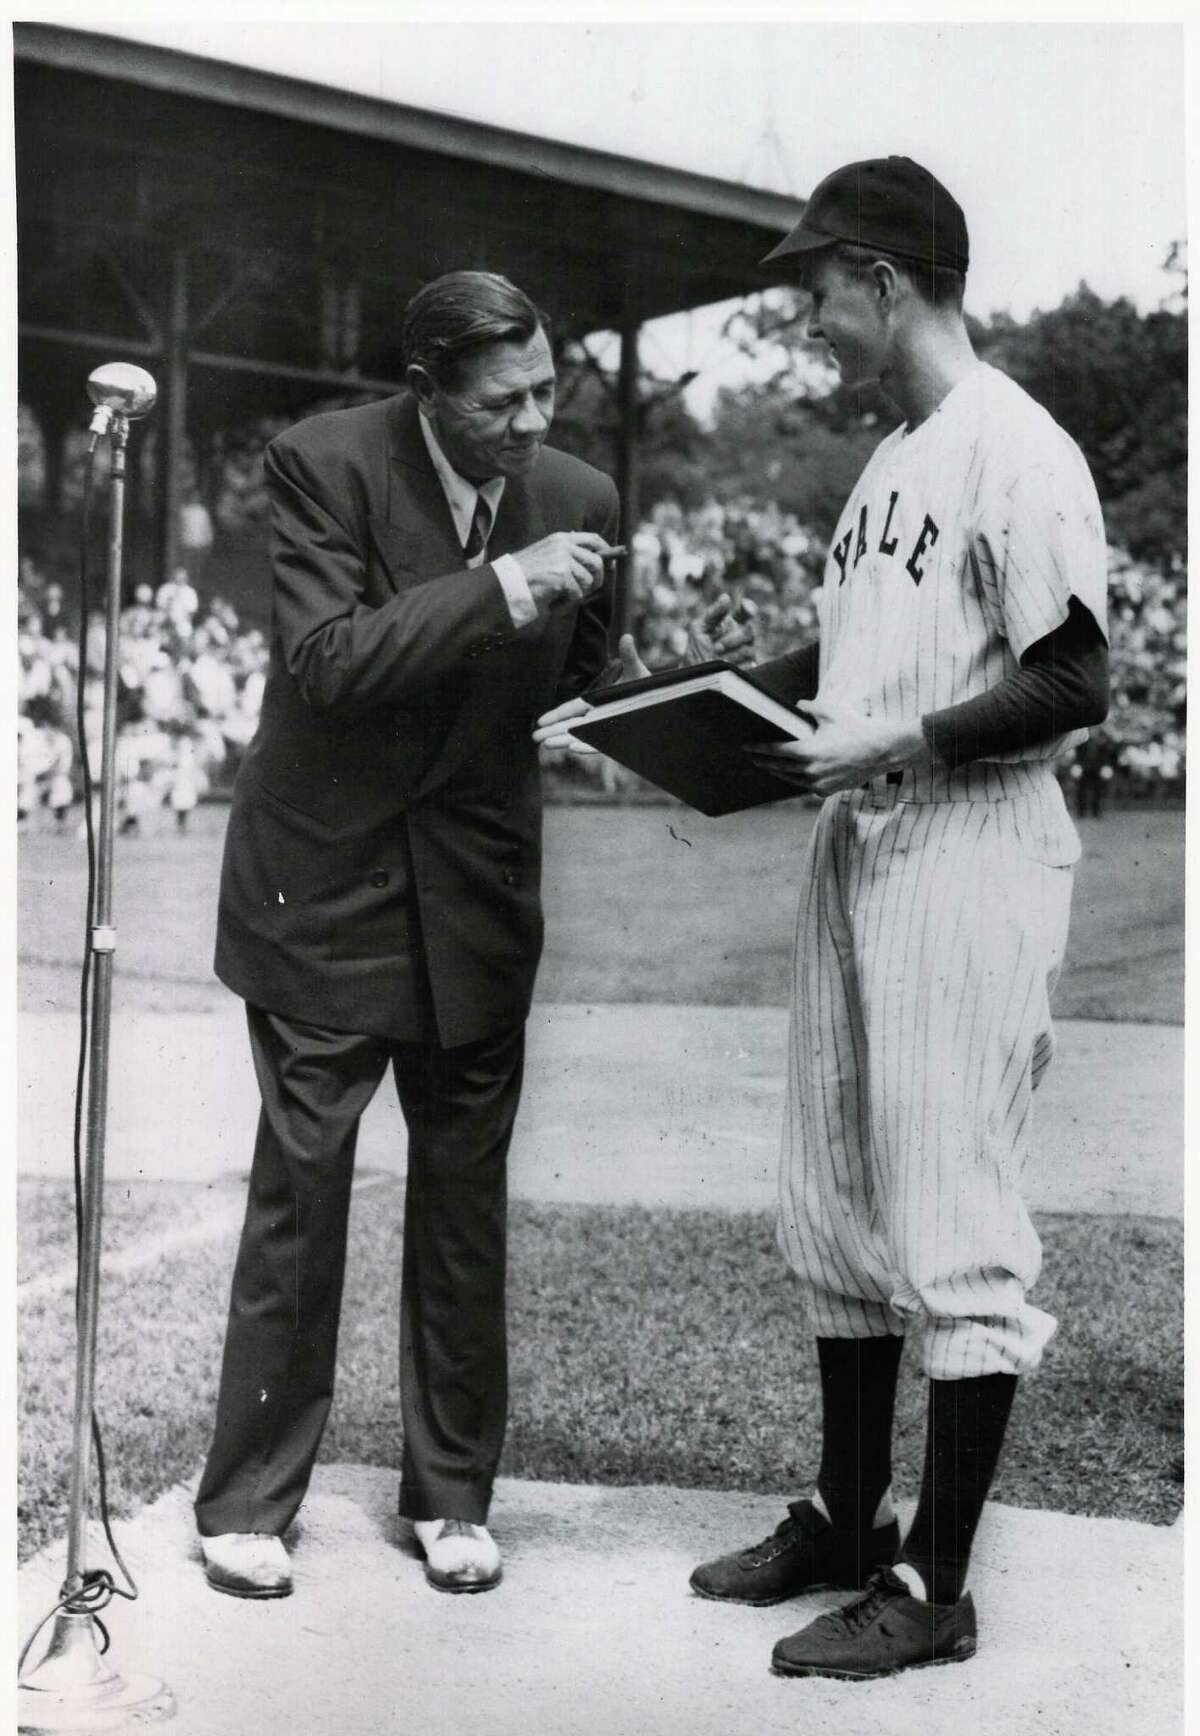 George H.W. Bush welcomes "Babe" Ruth at a pre-game ceremony at the Yale University Field in June 1948. Bush was then captain of the 1948 varsity team. It was one of Ruth’s last public appearances as he died later that summer. The photo notes it was donated to the New Haven Register on May 31, 1991 by the Yale University Office of Official Affairs.